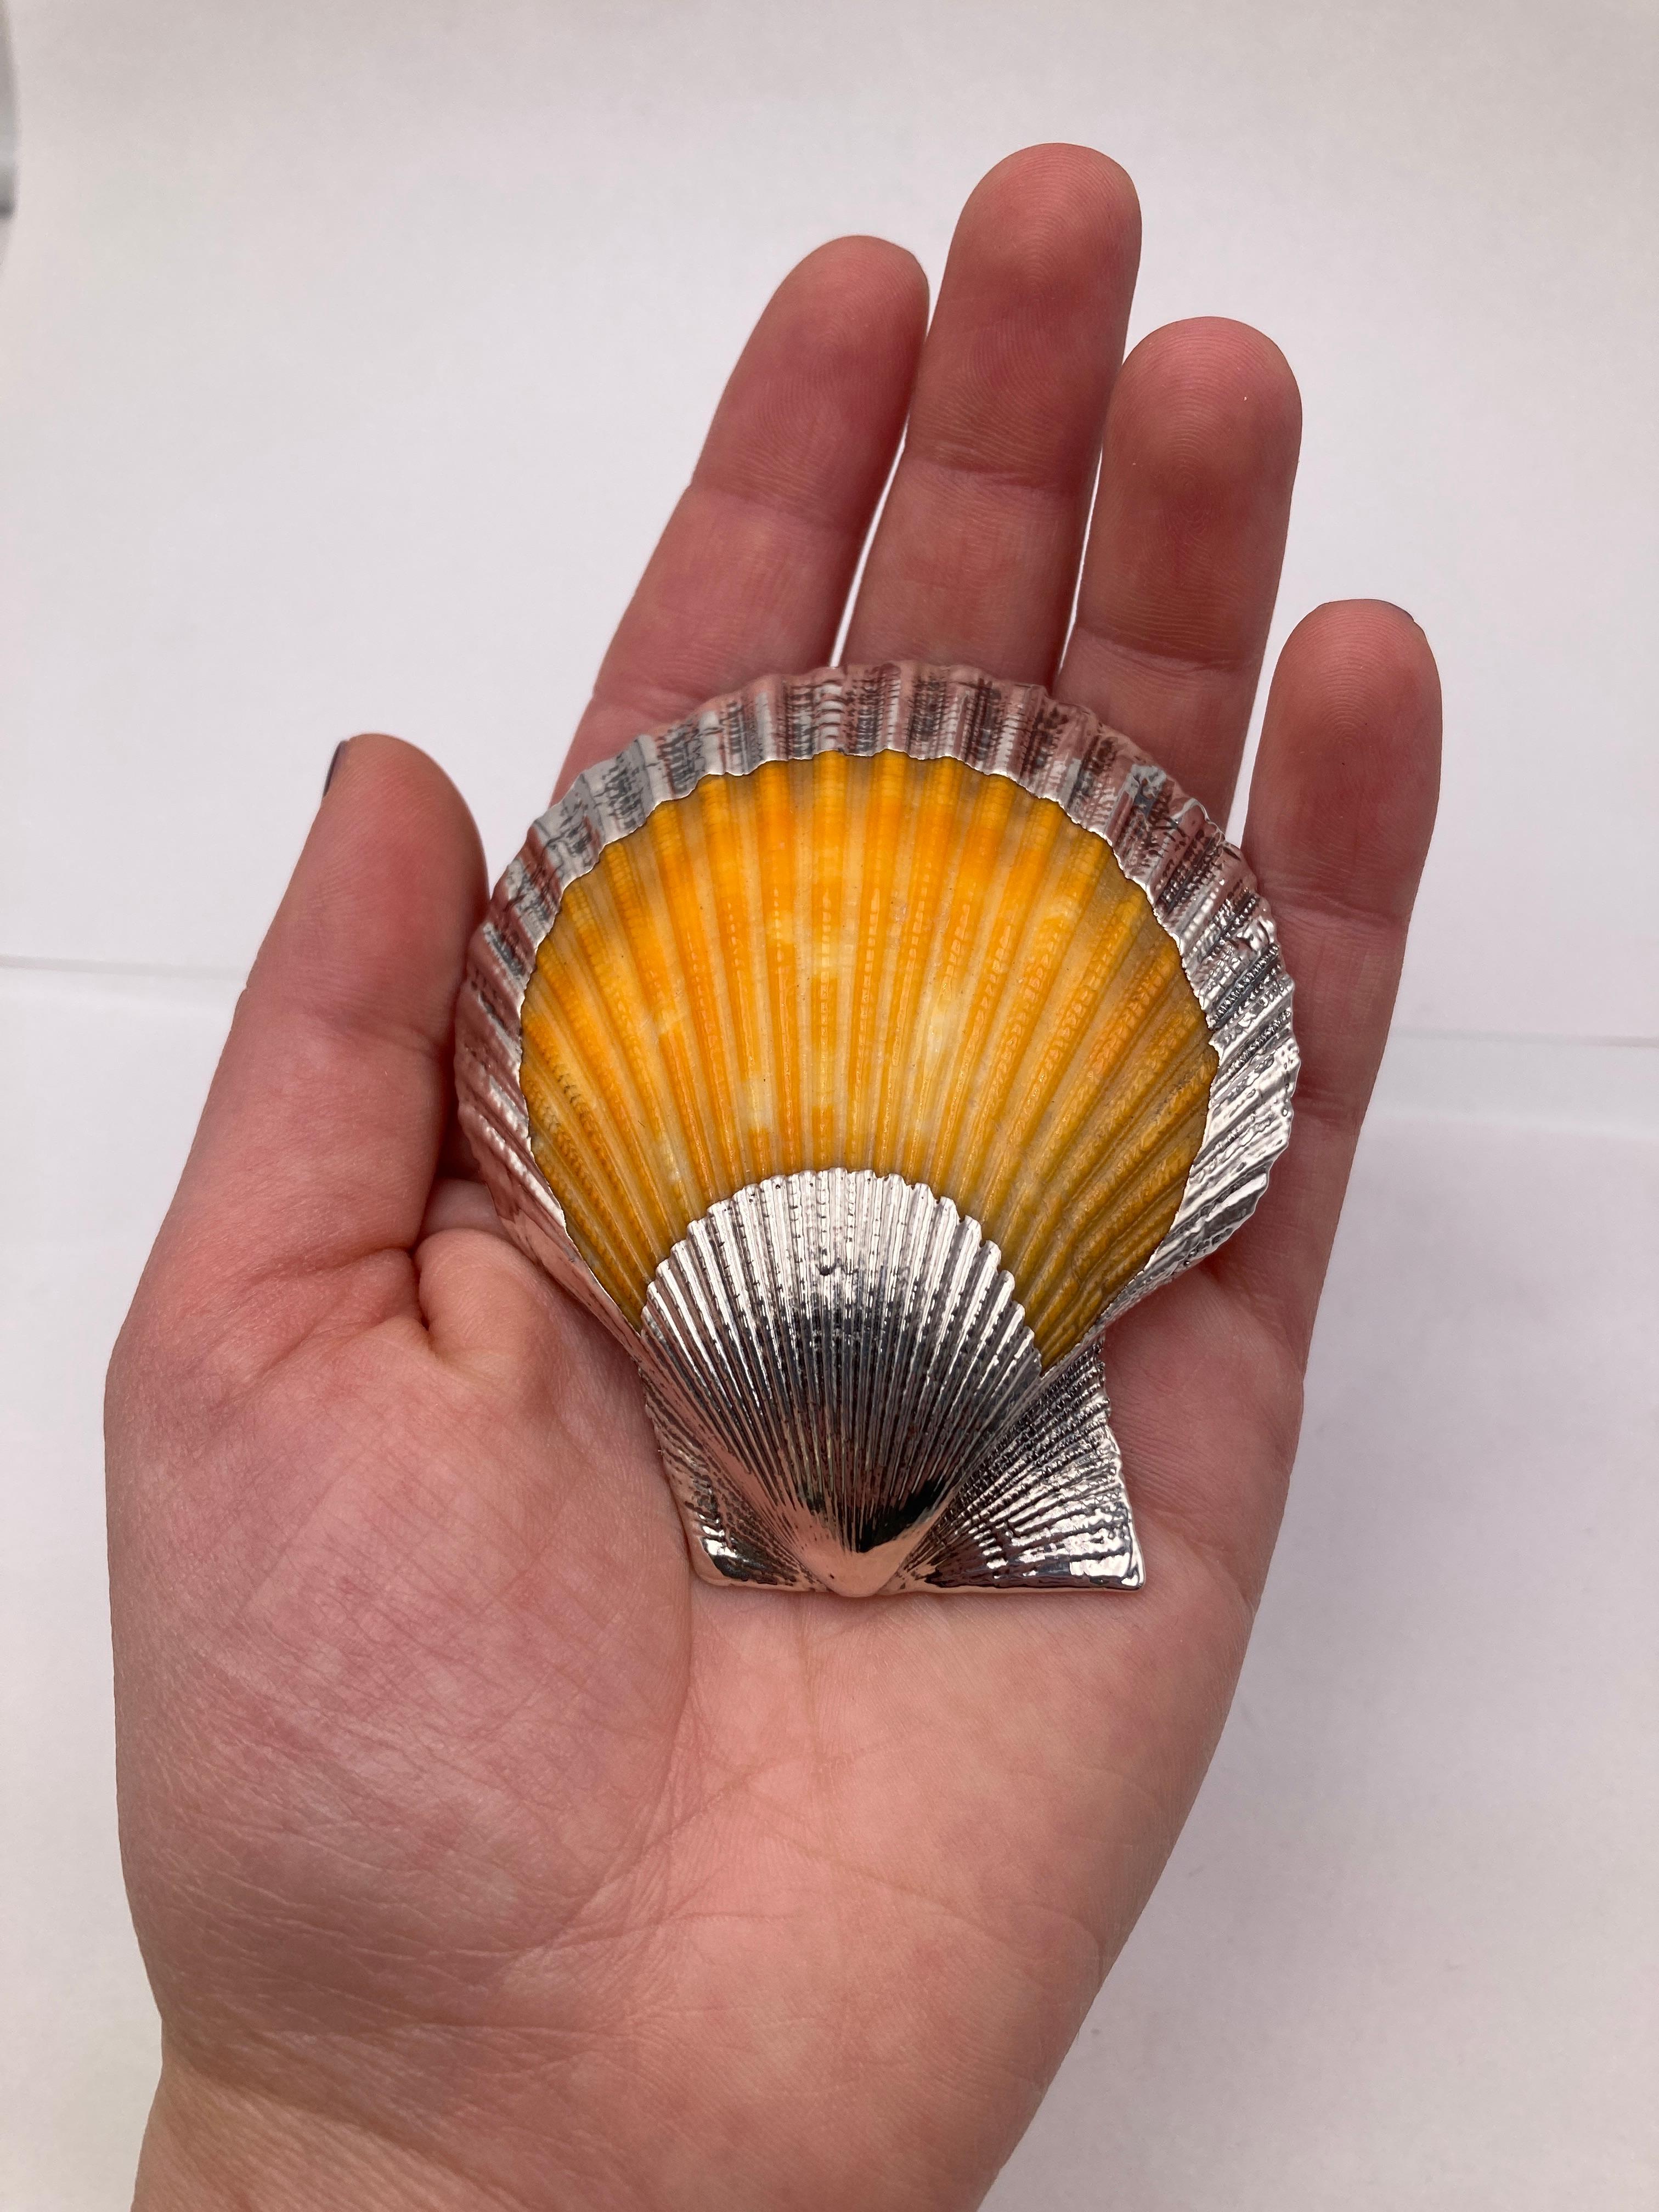 80s Desk Accessory Silver Shell.
Dimension: 6.5 x 7.0 cm
A natural shell from the 80s, delicately encased in silver, presents itself as a timeless treasure. Impeccably preserved with its vibrant hues of orange and beige, it stands as a testament to